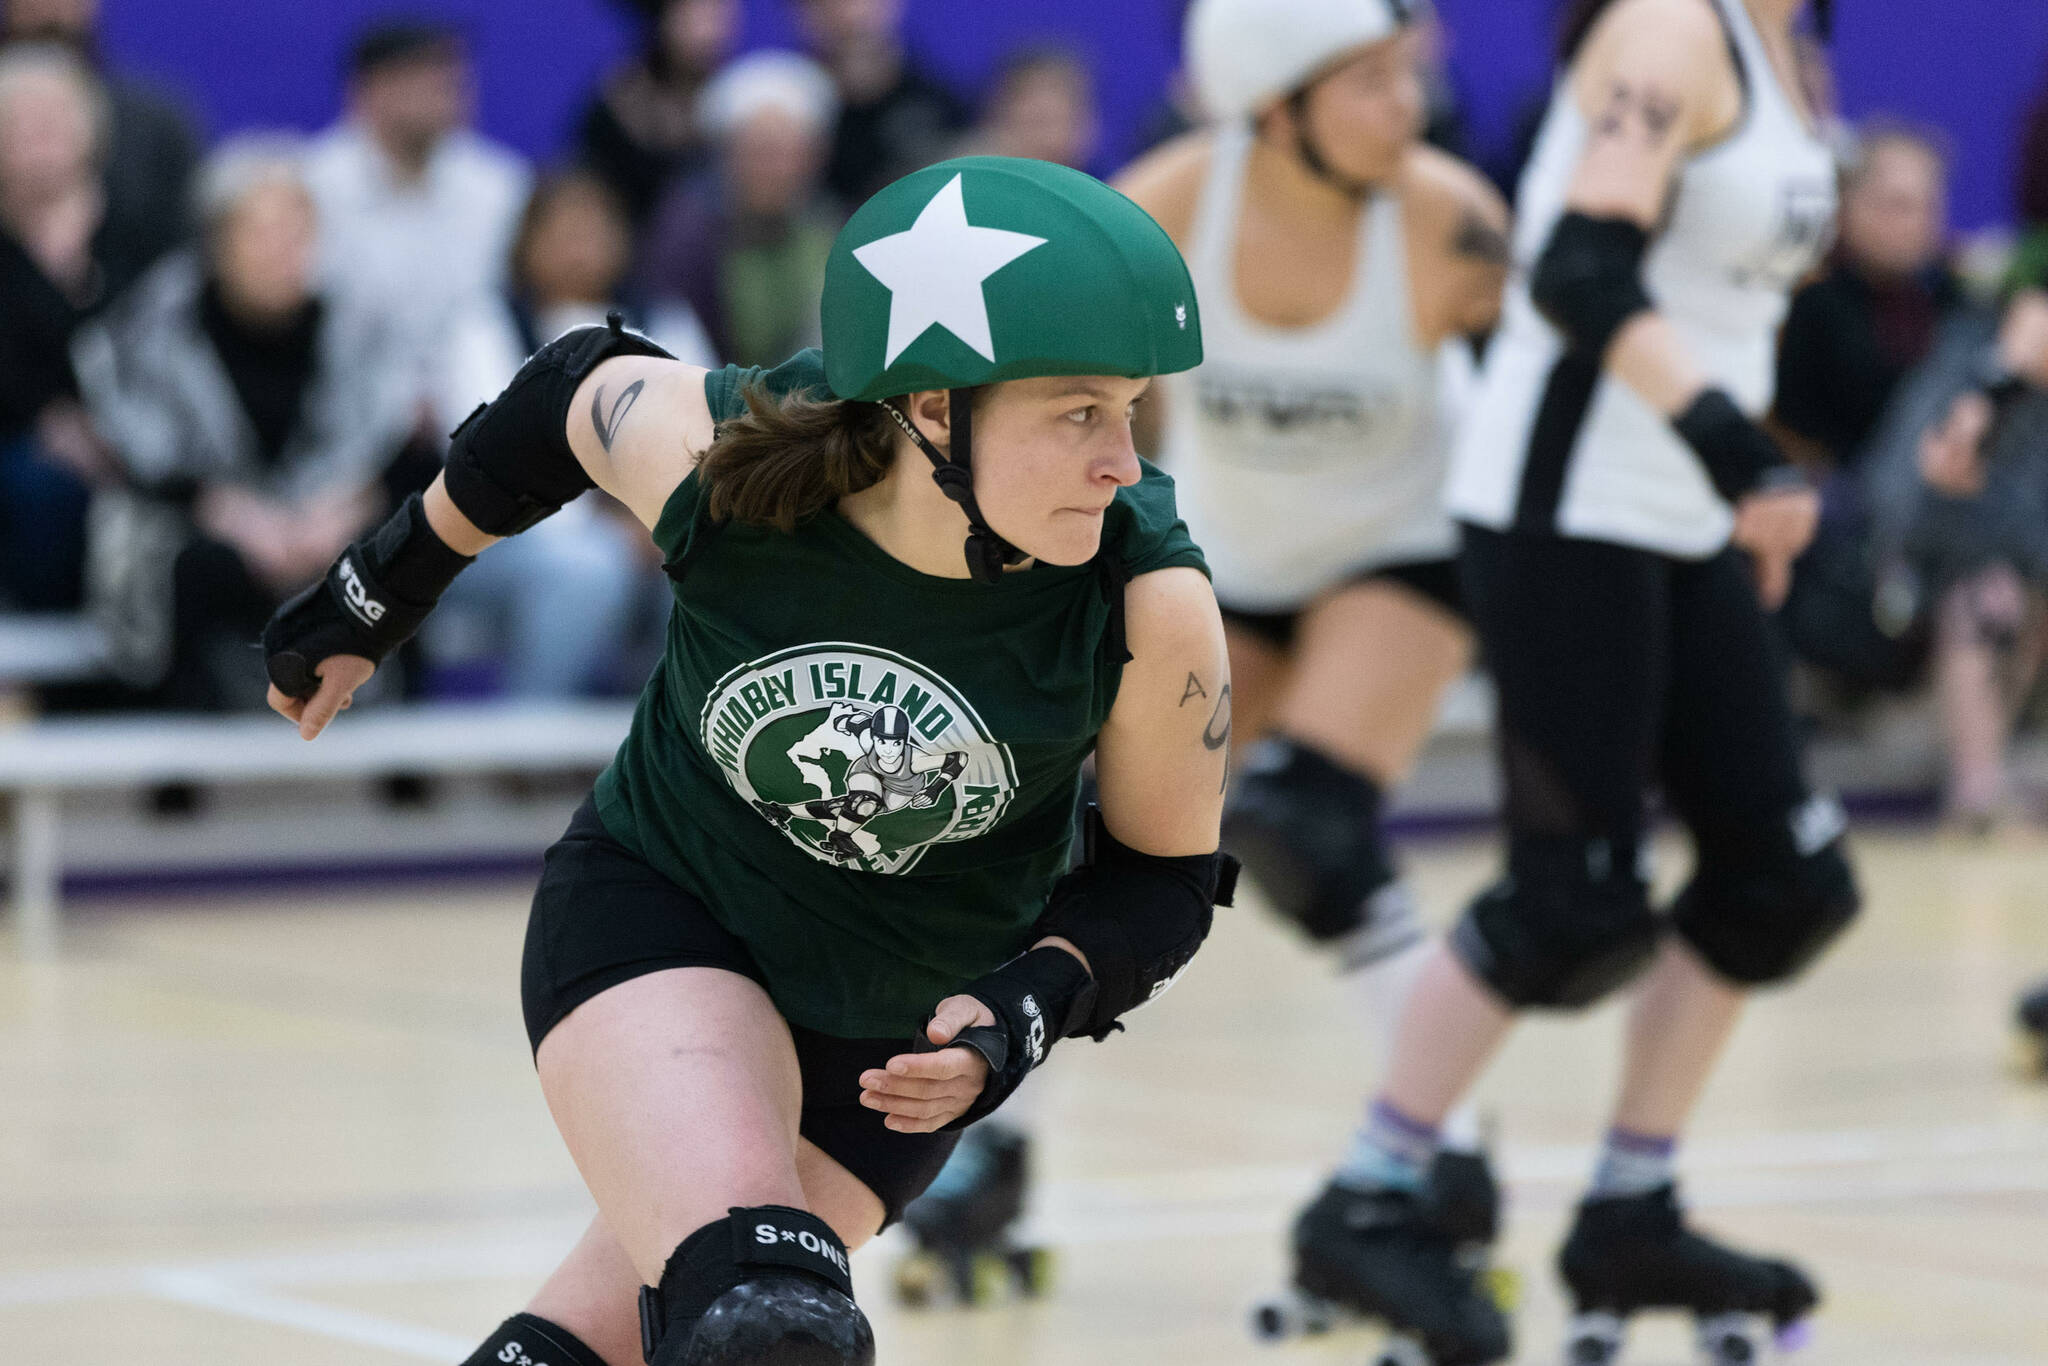 Whitni “Wild Sockeye” Schurr skates in a Whidbey Island Roller Derby bout March 11.